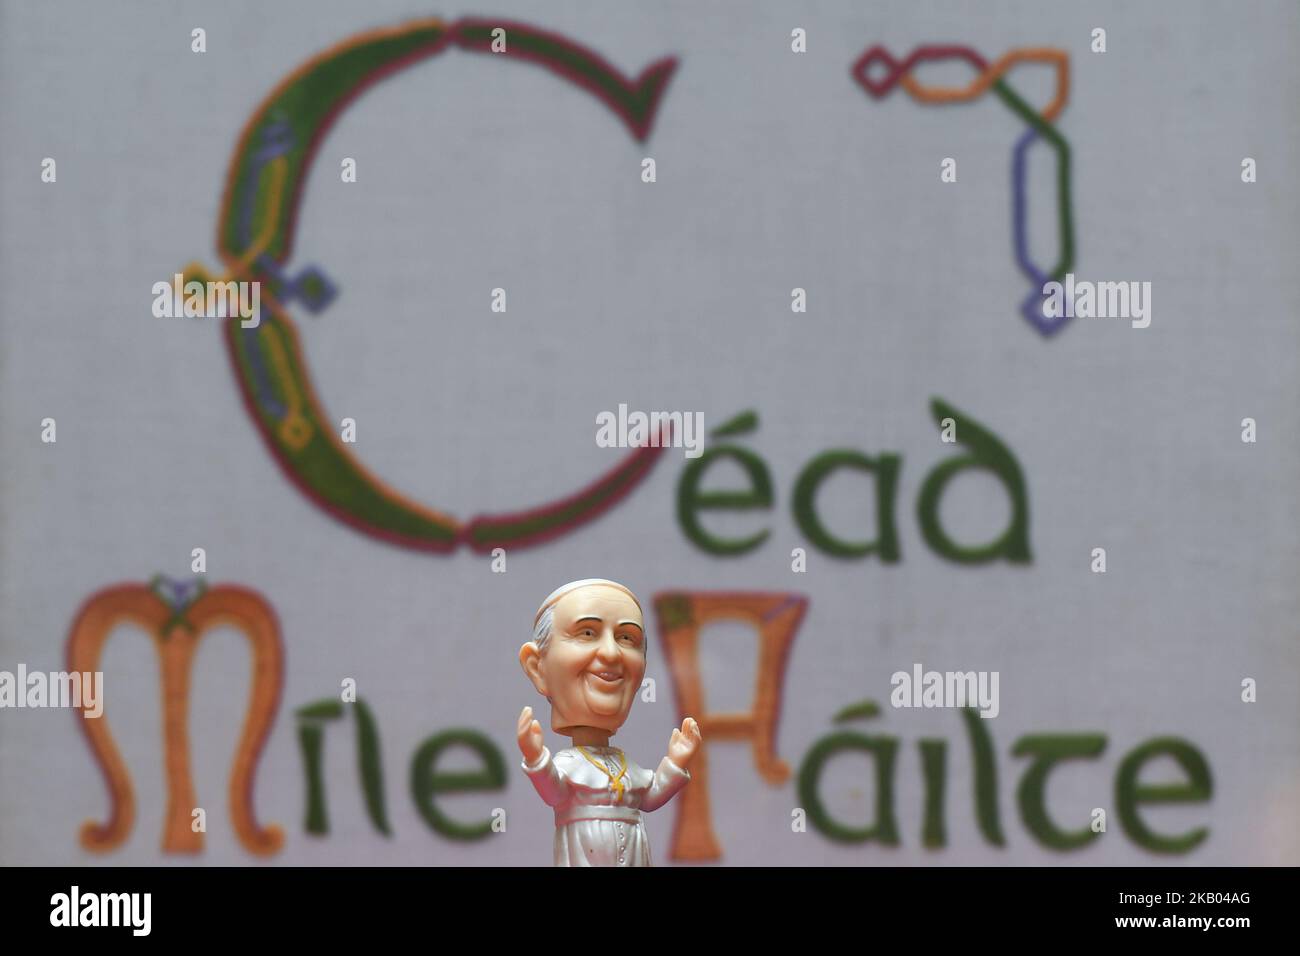 A mini size Pope Francis Bobble head in front of a 'Cead Míle Failte' ('a hundred thousand welcomes' Irish saying) on display at Dublin's Balla Ban Art Gallery. The gallery owner Frank O'Dea will be giving them out for free with every purchase made during the Pope's visit to Ireland. Pope Francis is due to visit Ireland from August 21 to 26 in what will be the first papal visit since Pope John Paul II came in 1979. On Wednesday, July 18 2018, in Dublin, Ireland. (Photo by Artur Widak/NurPhoto)  Stock Photo